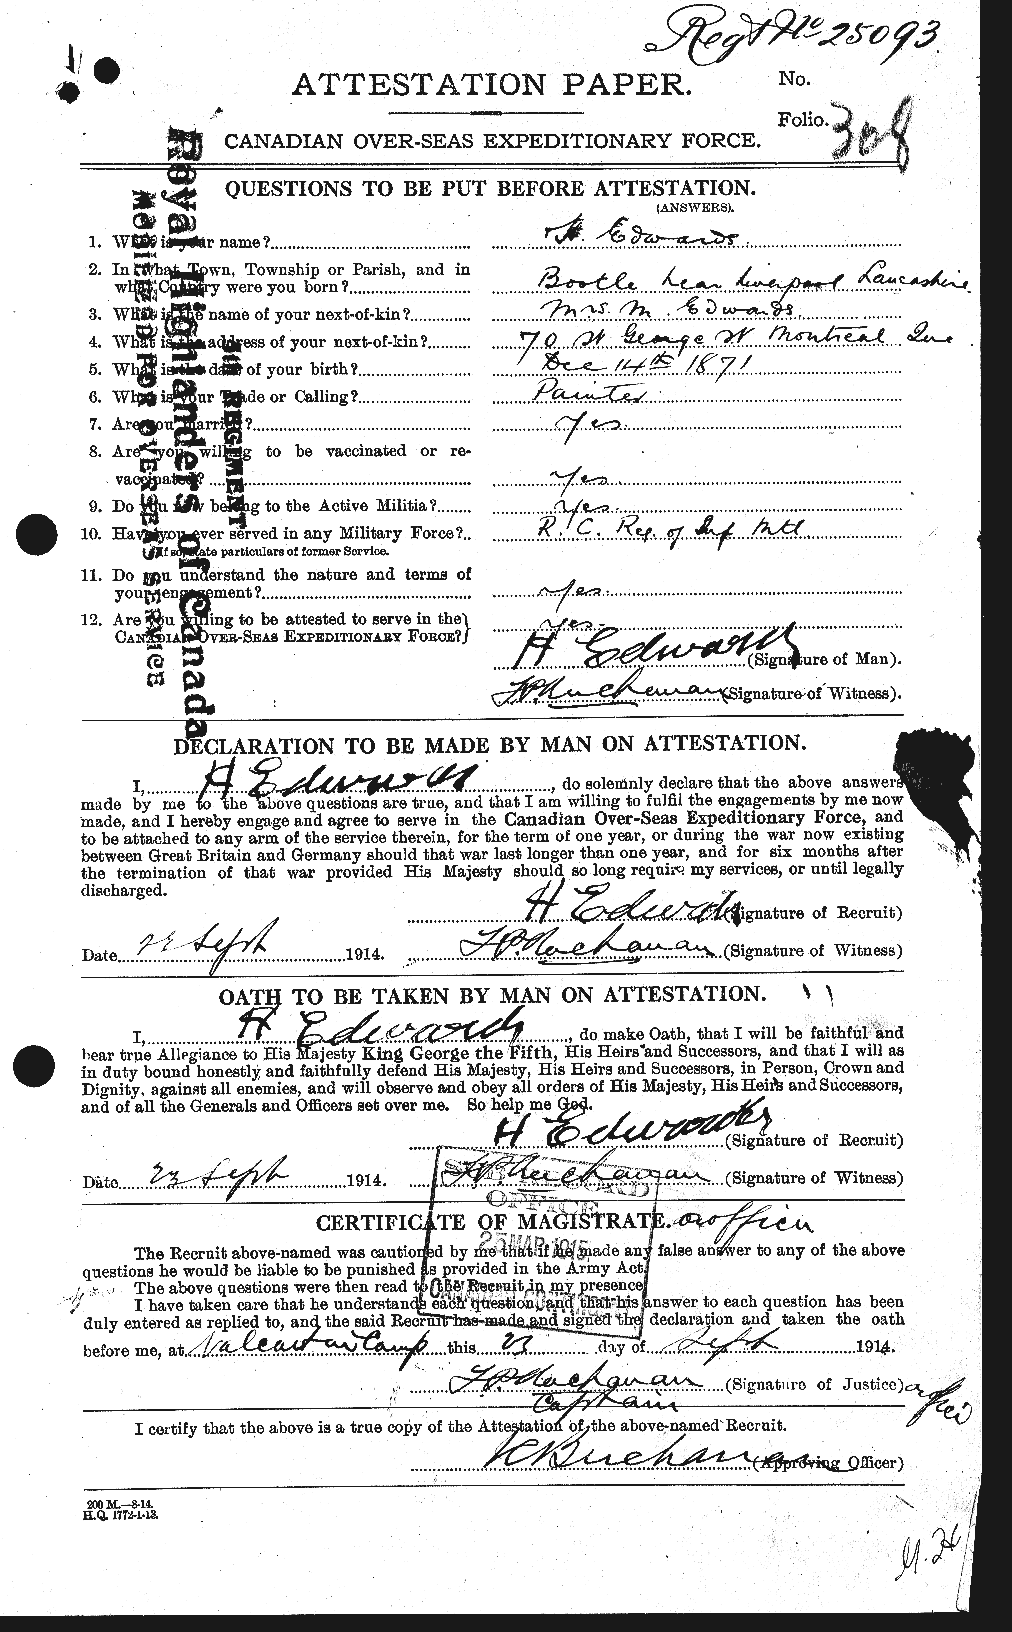 Personnel Records of the First World War - CEF 309724a